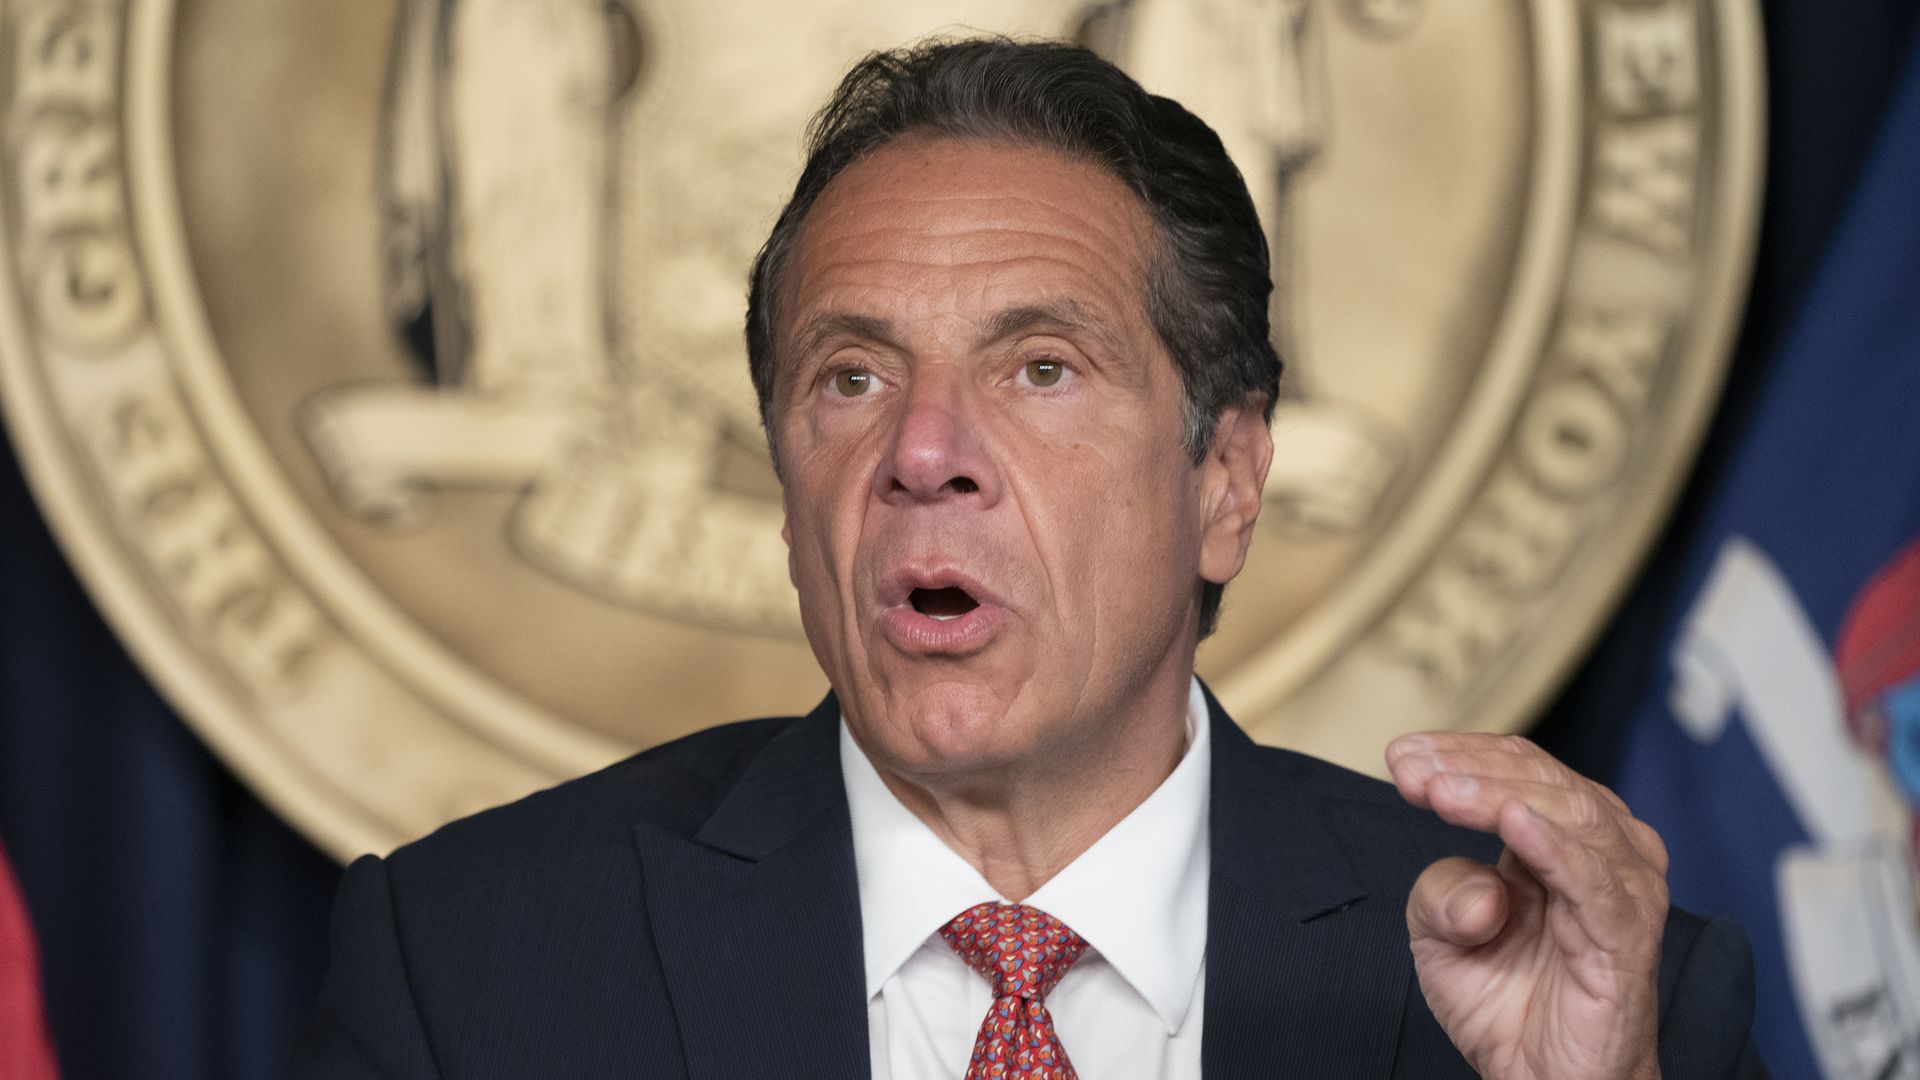 Former new York Gov. Andrew Cuomo during a press conference in August 2021.